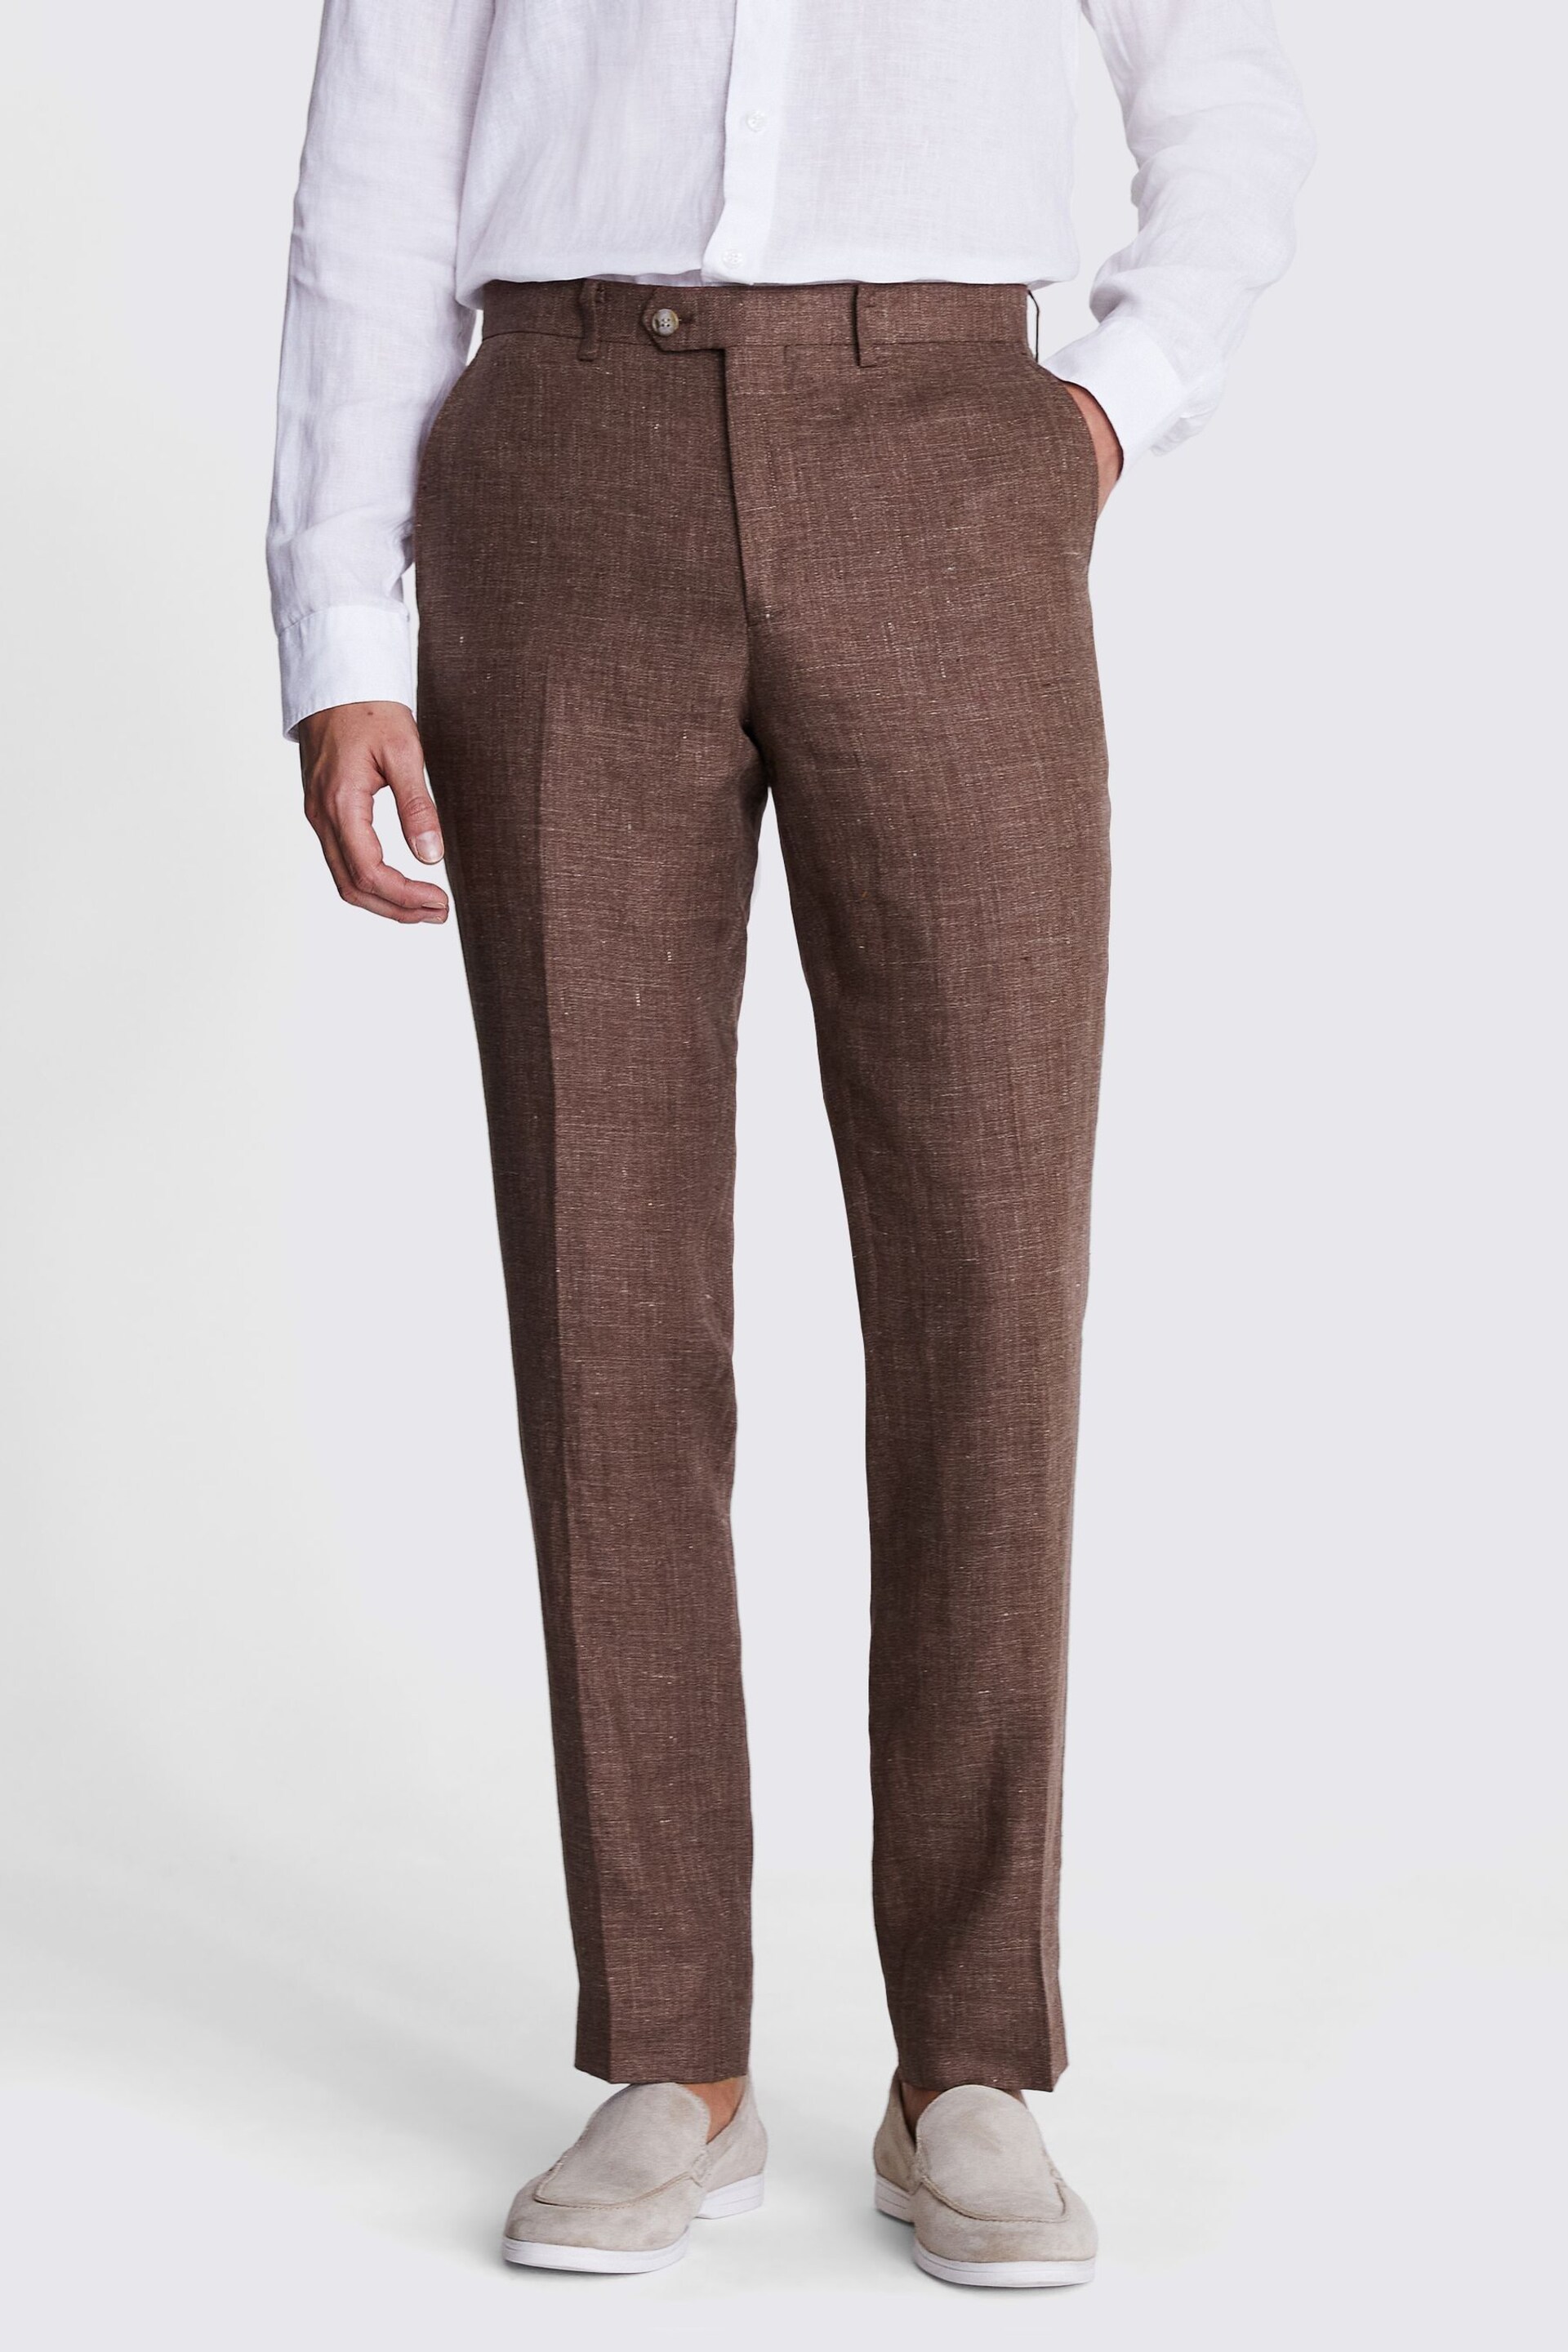 MOSS Tailored Fit Rust Linen Brown Trousers - Image 1 of 3